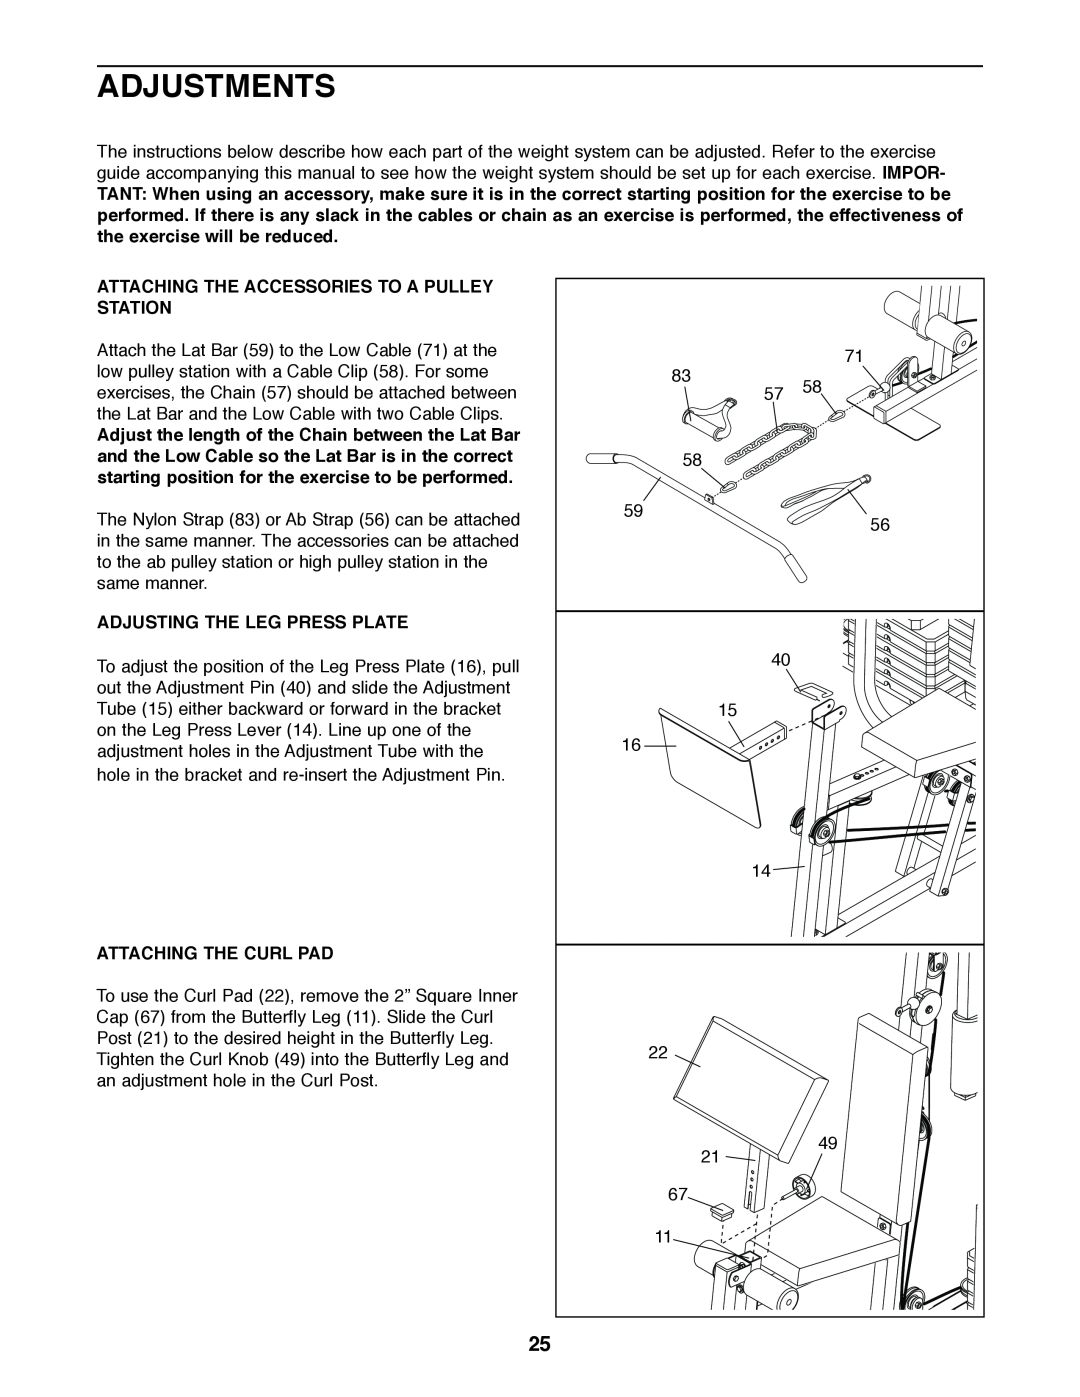 Weider 831.159830 user manual Adjustments, Attaching The Accessories To A Pulley Station, Adjusting The Leg Press Plate 